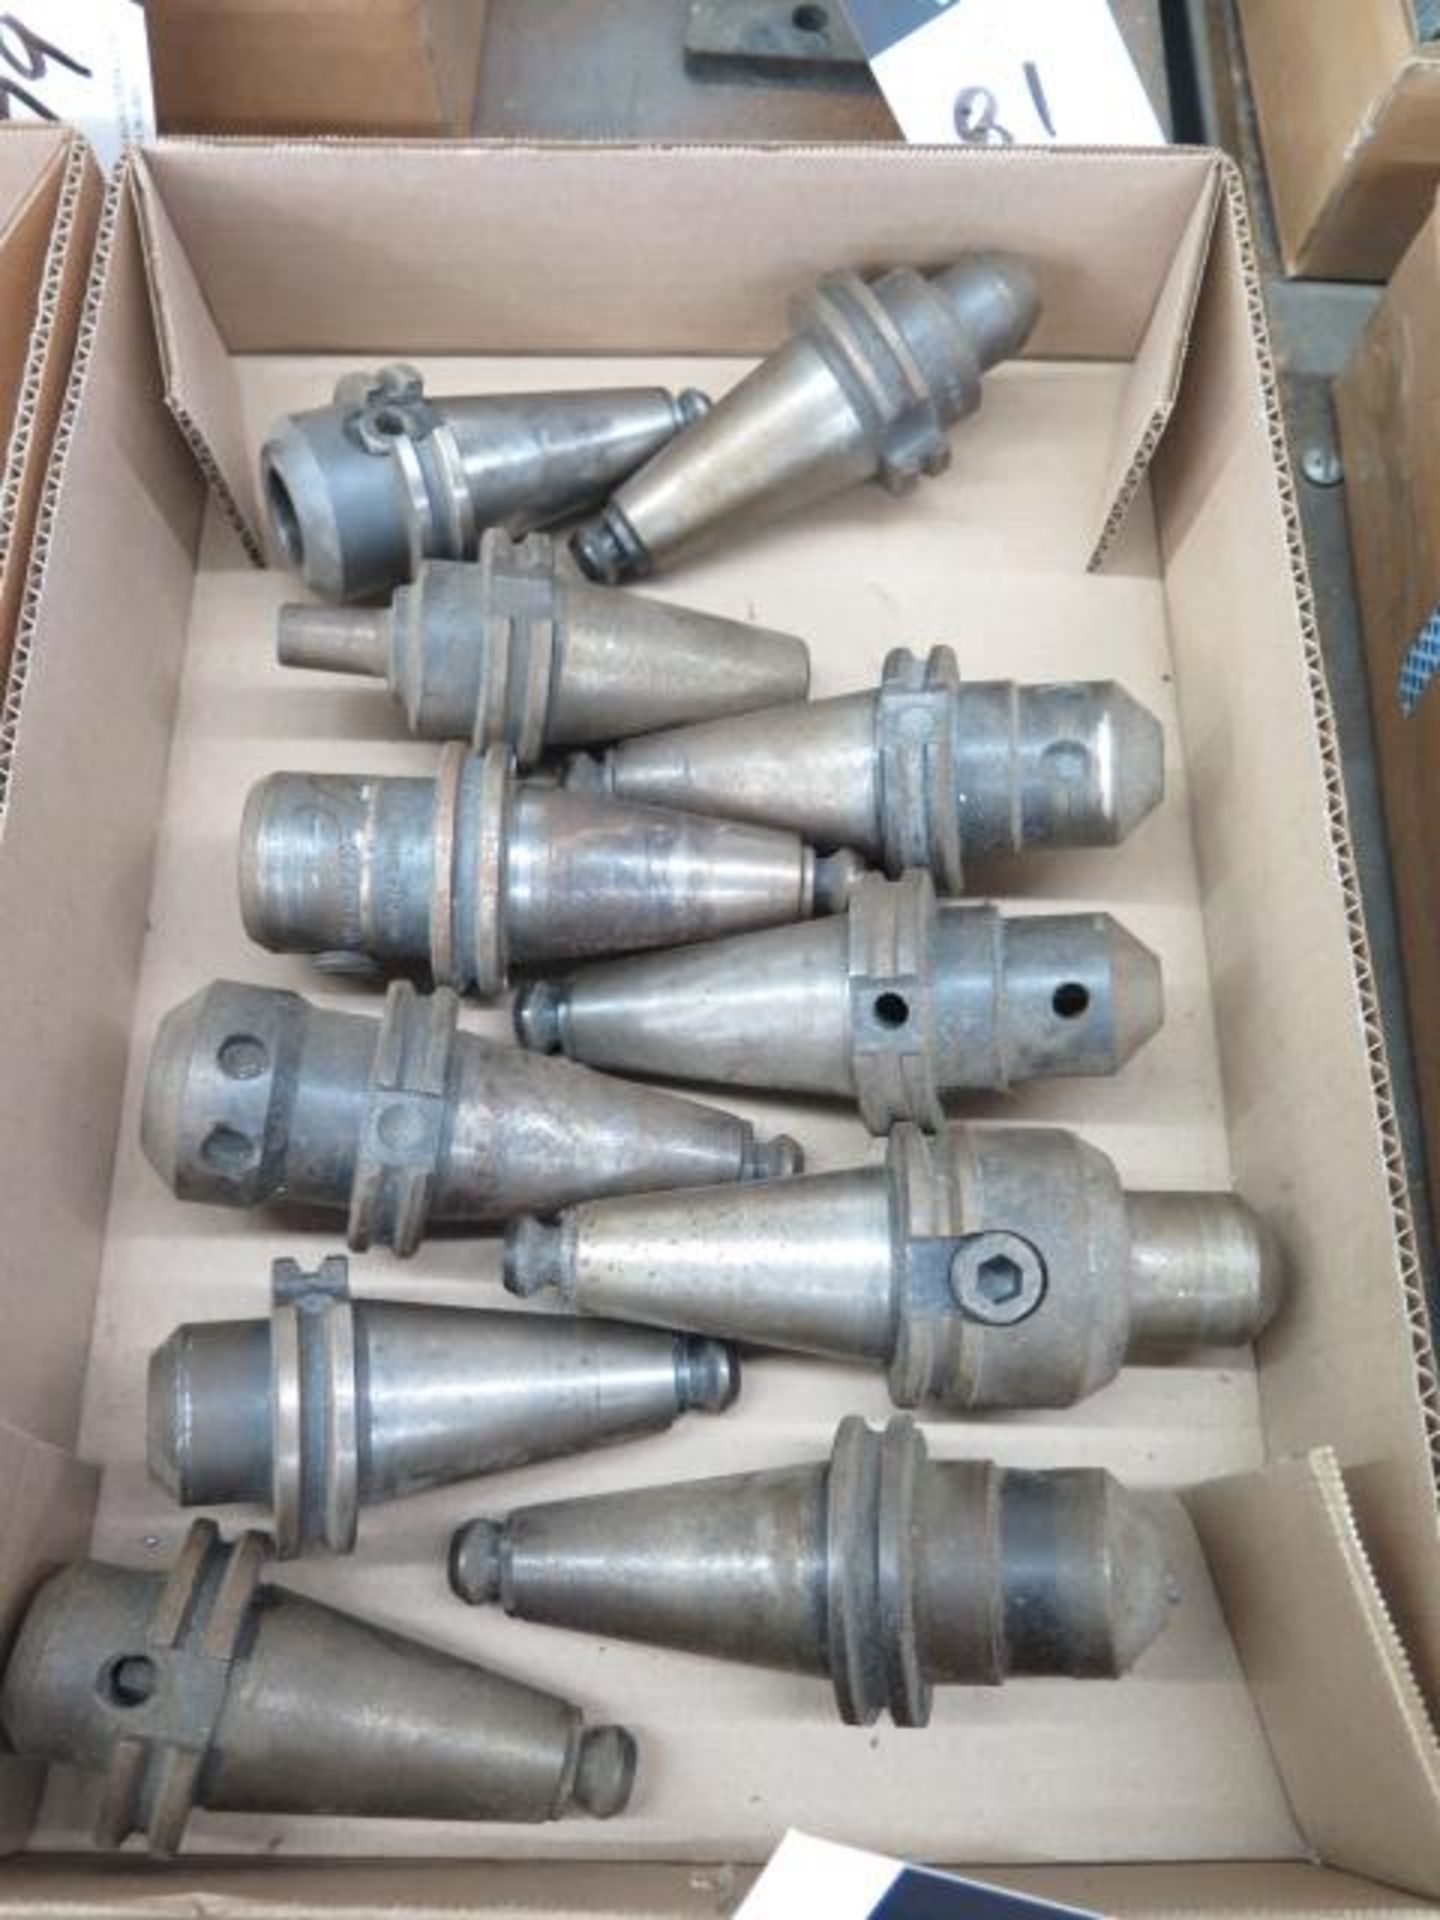 CAT-40 Taper Tooling (10) (SOLD AS-IS - NO WARRANTY) - Image 2 of 4